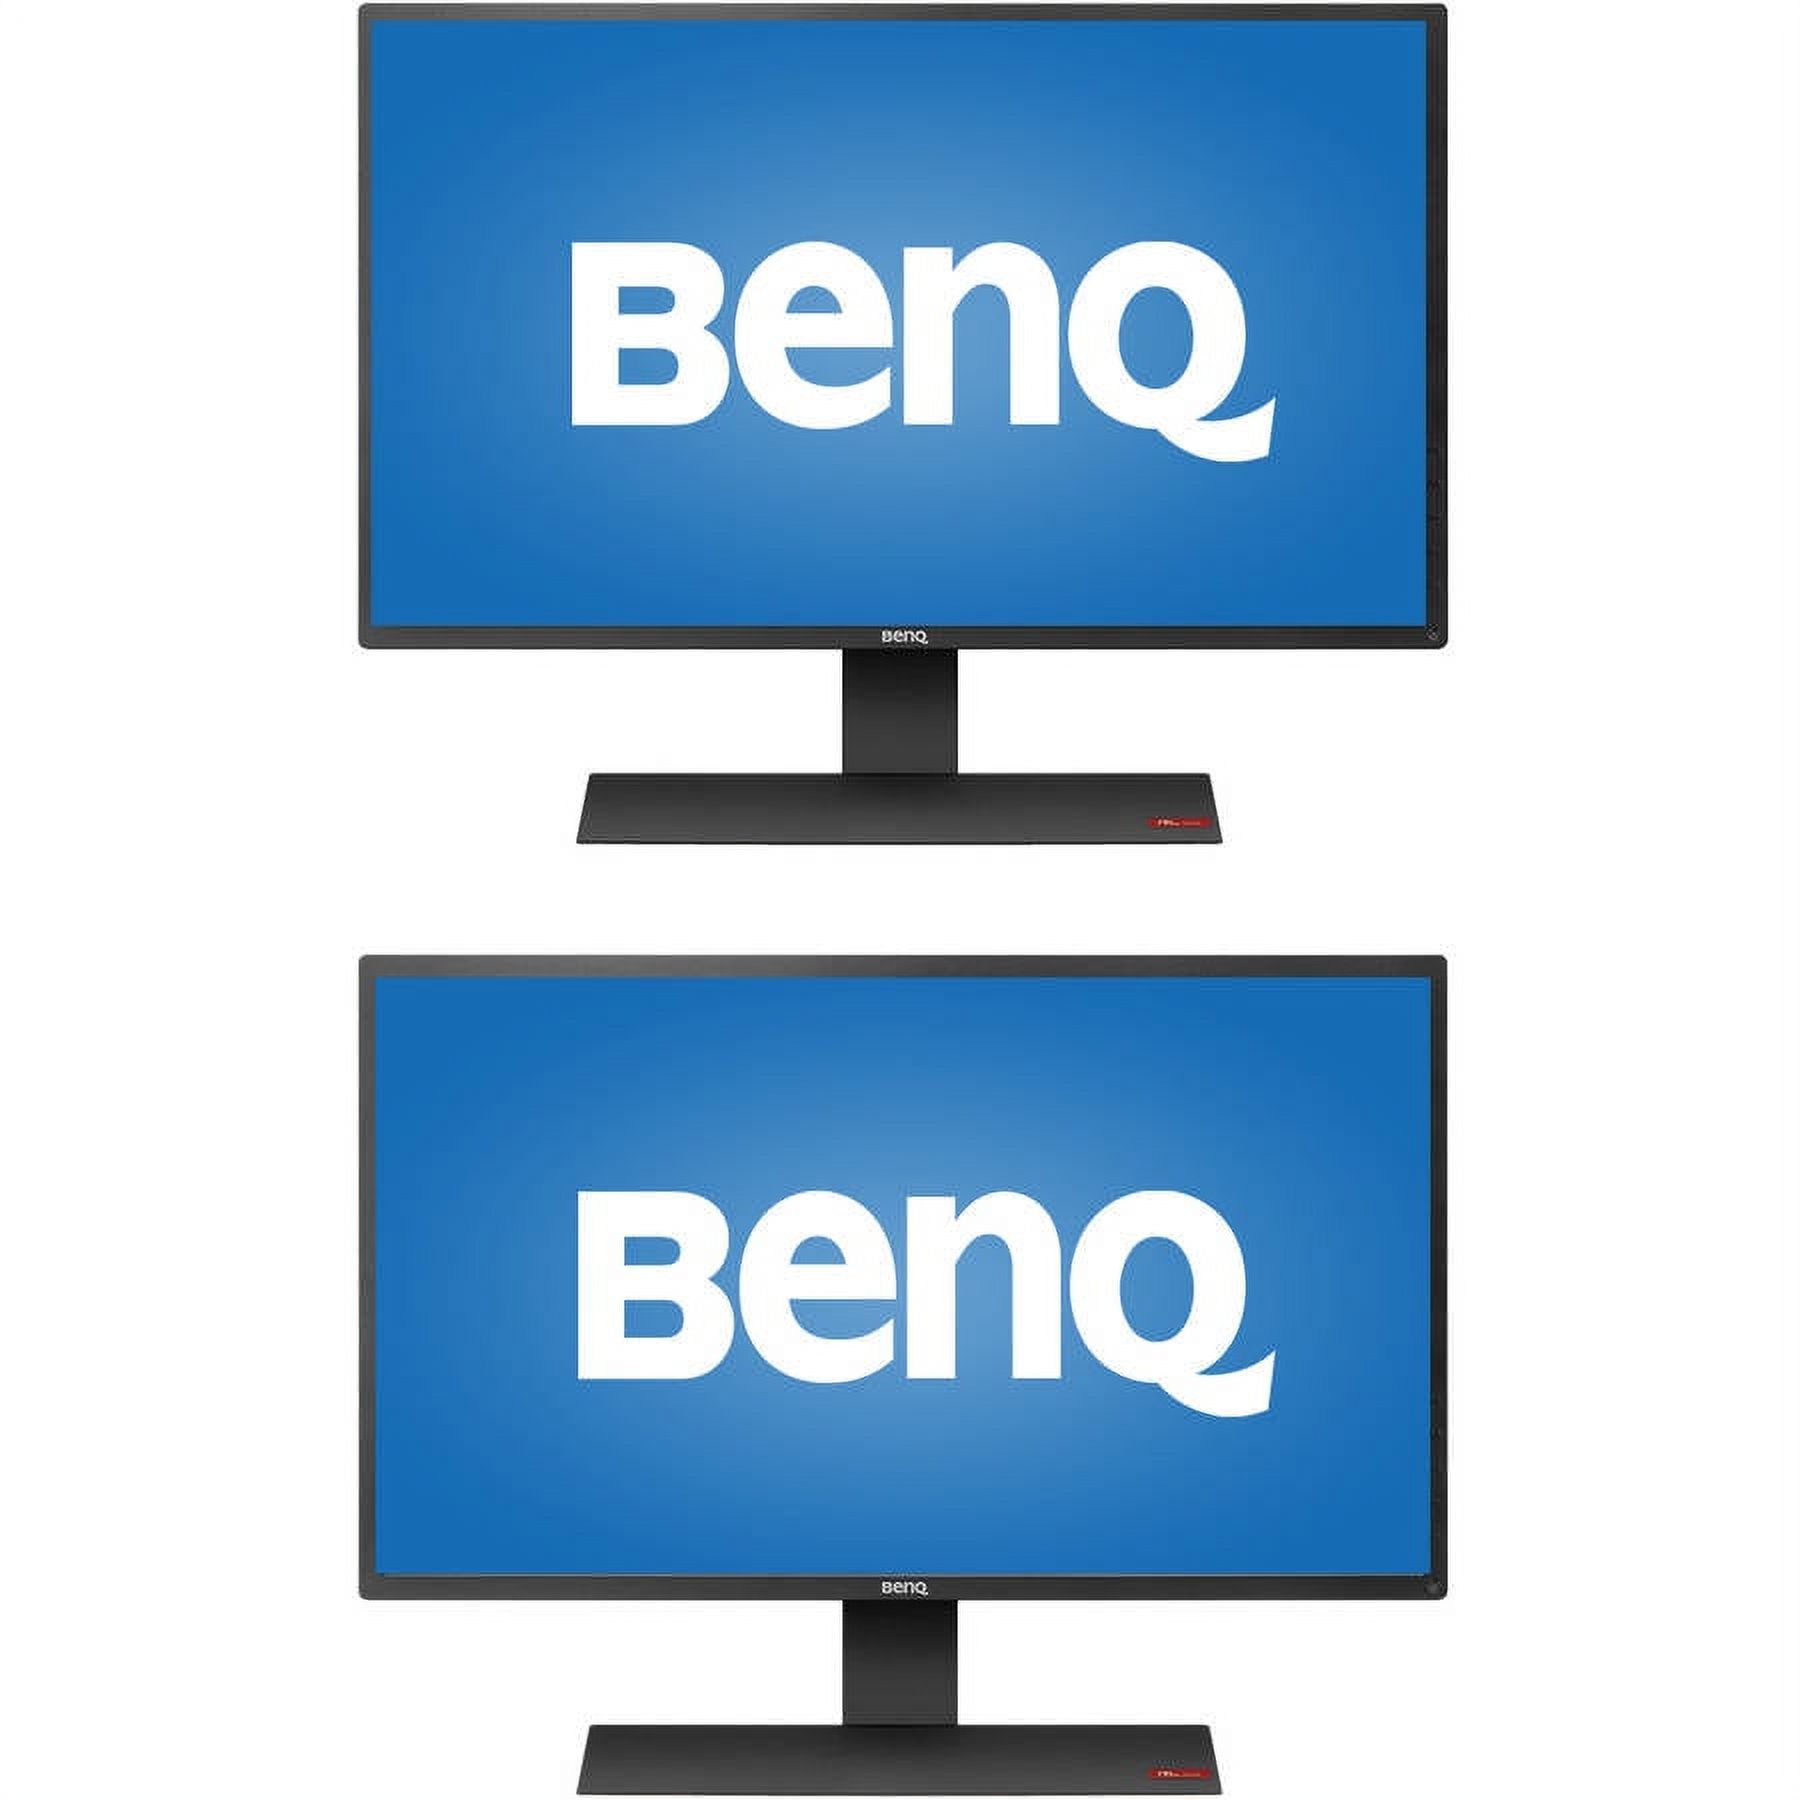 BenQ 27" LED Widescreen Console Gaming Monitor (RL2755HM Black), 2-Pack - image 1 of 1